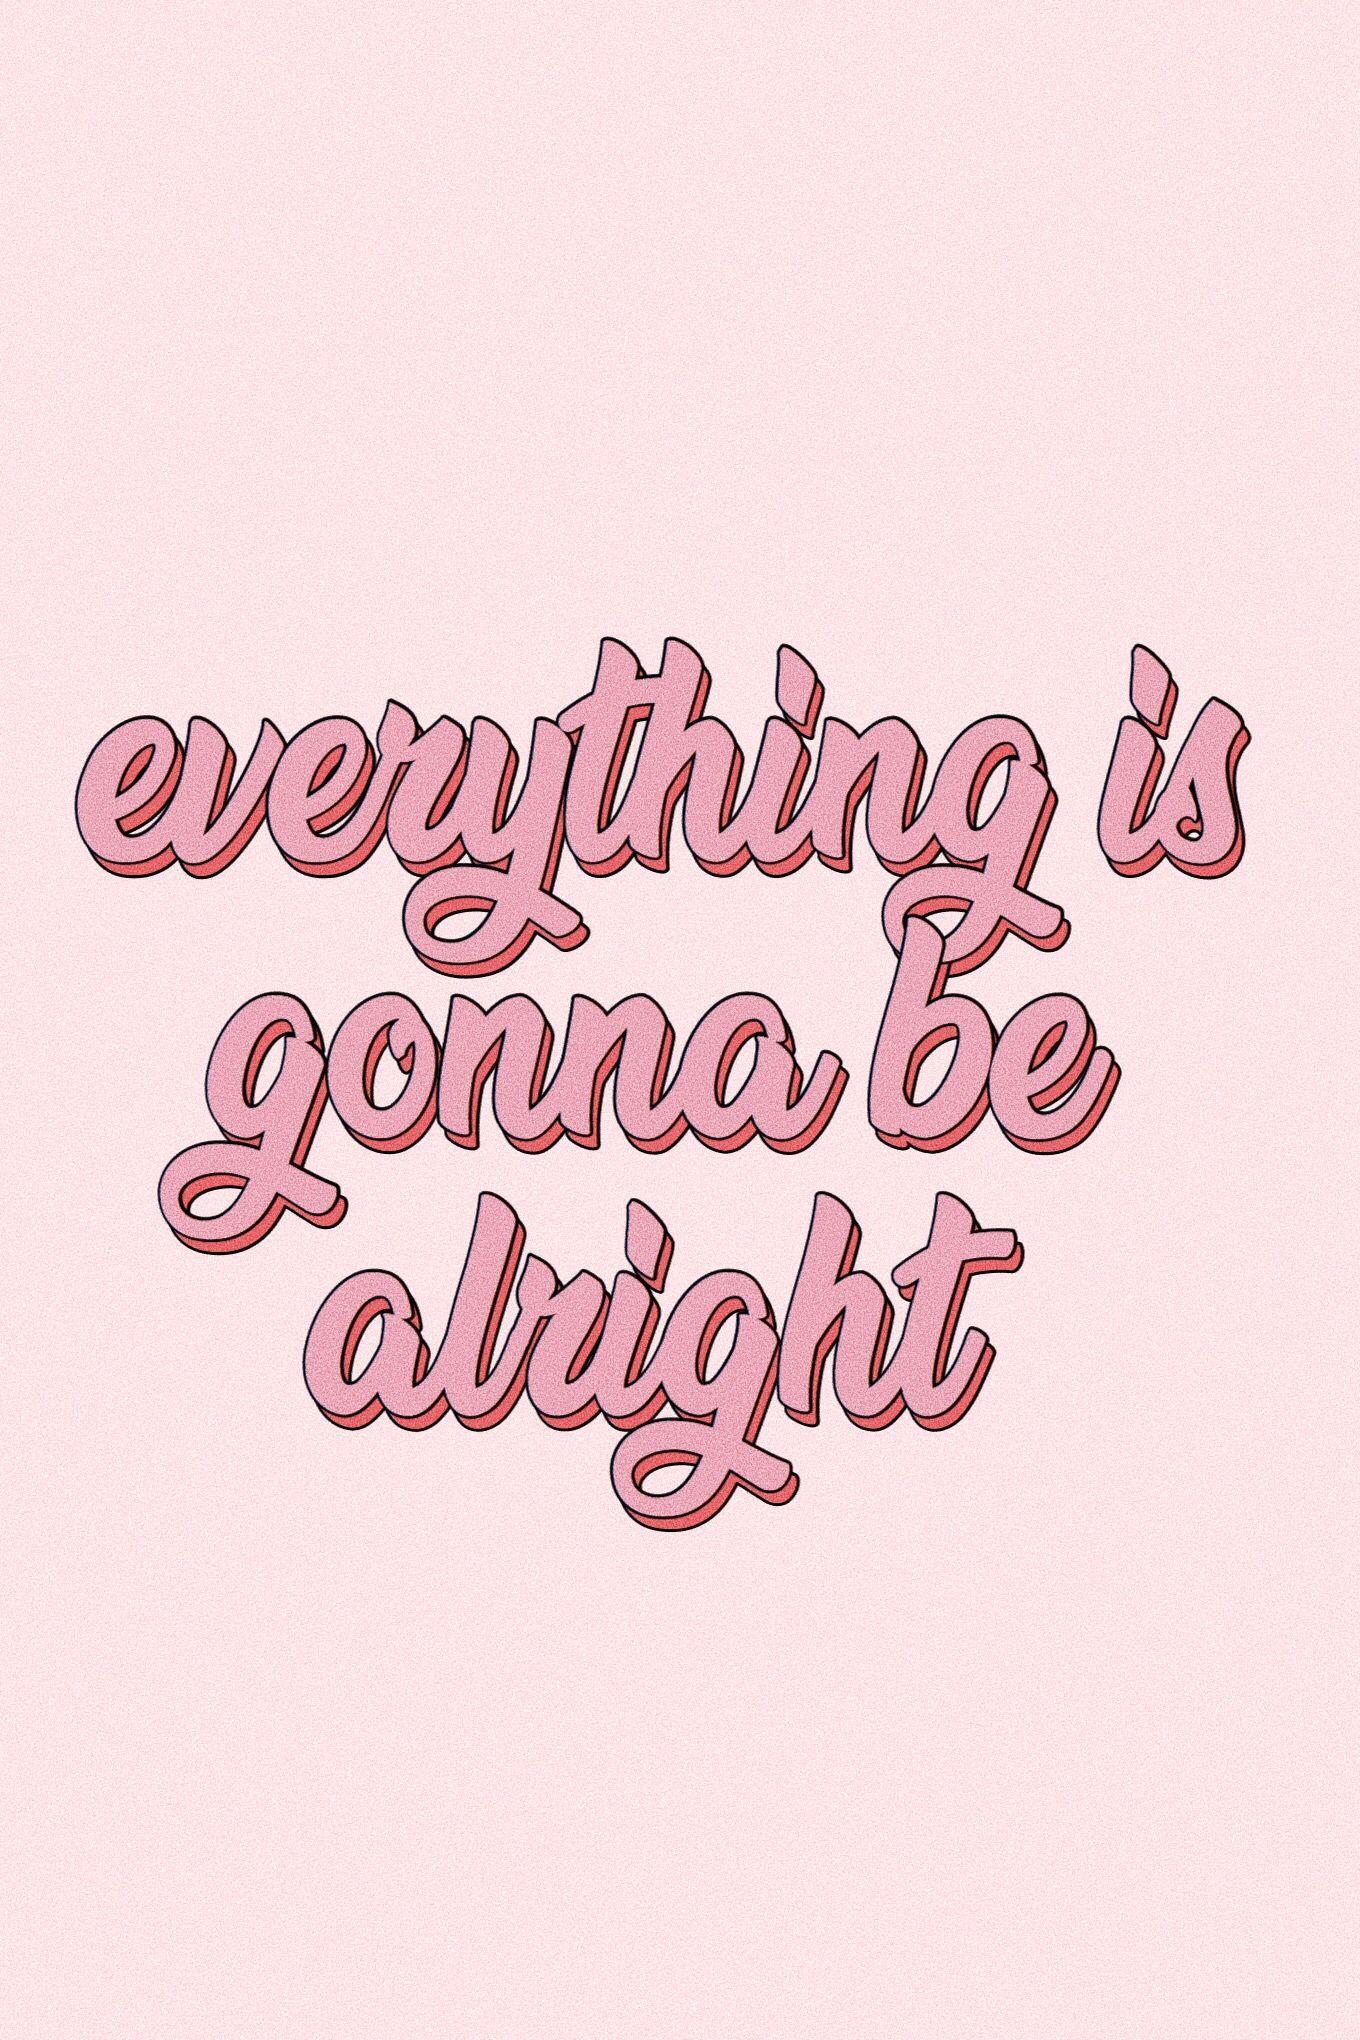 Everything Will Be Alright Wallpapers - Top Free Everything Will Be ...